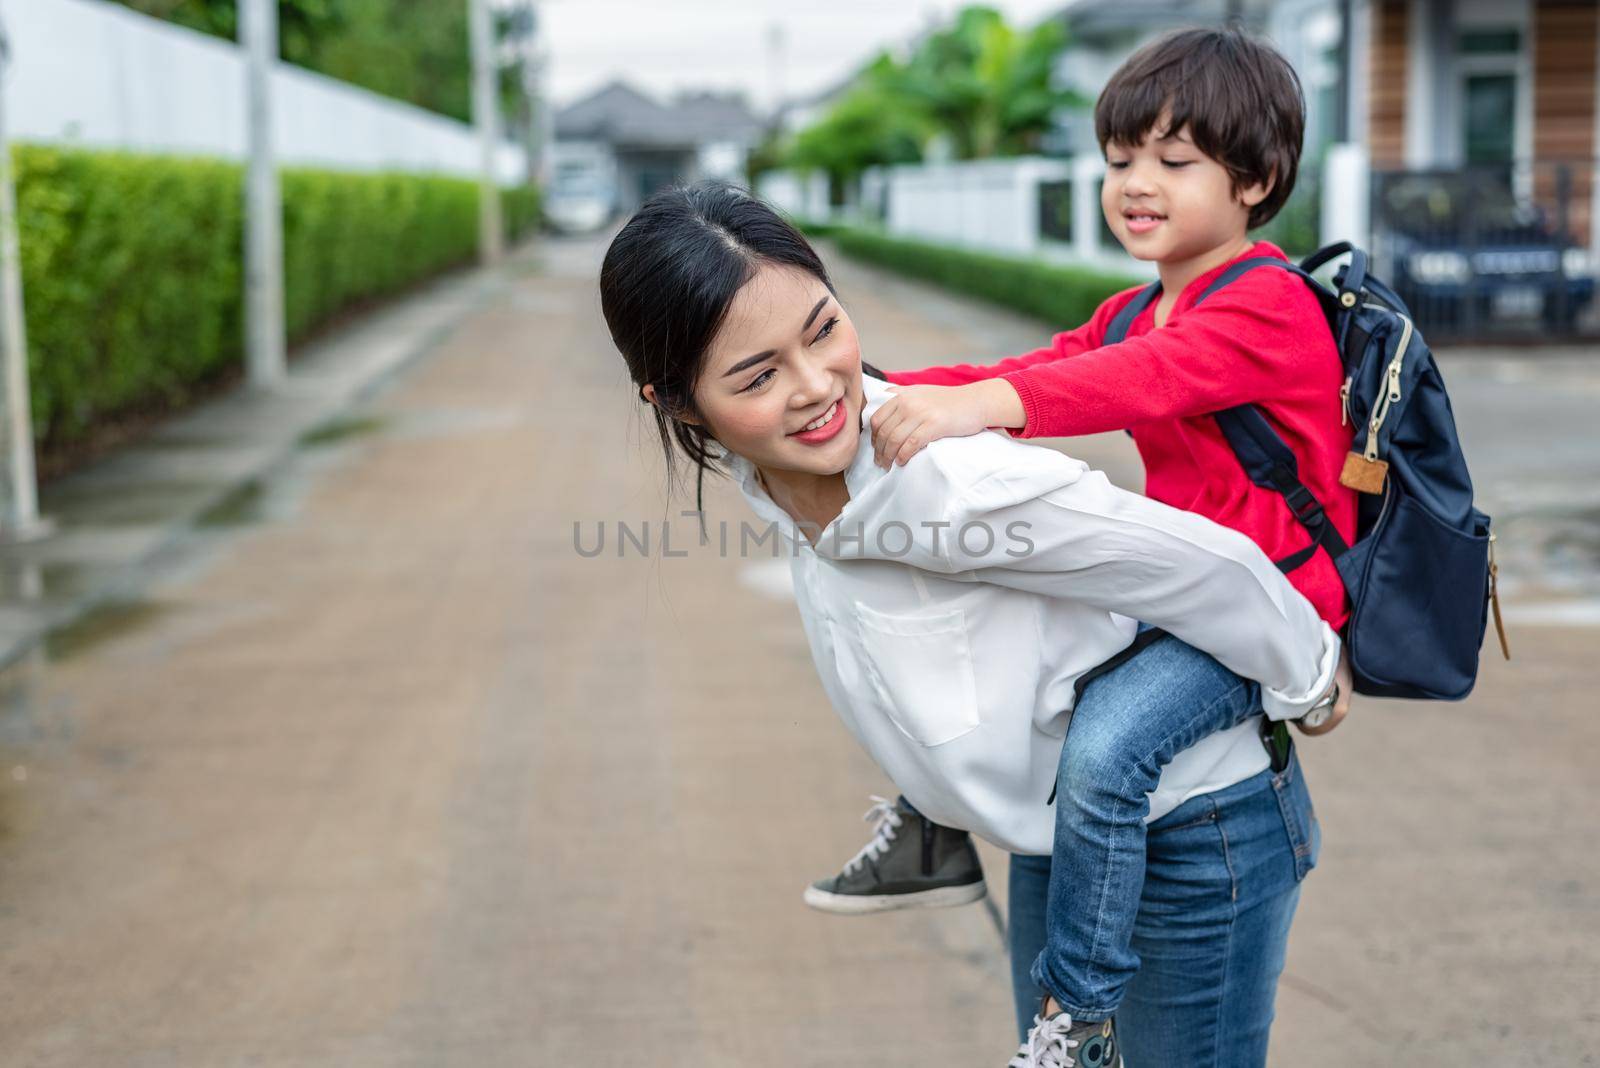 Single mom carrying and playing with her children near home with villa street background. People and Lifestyles concept. Happy family and Home sweet home theme. Outdoors and nature theme.